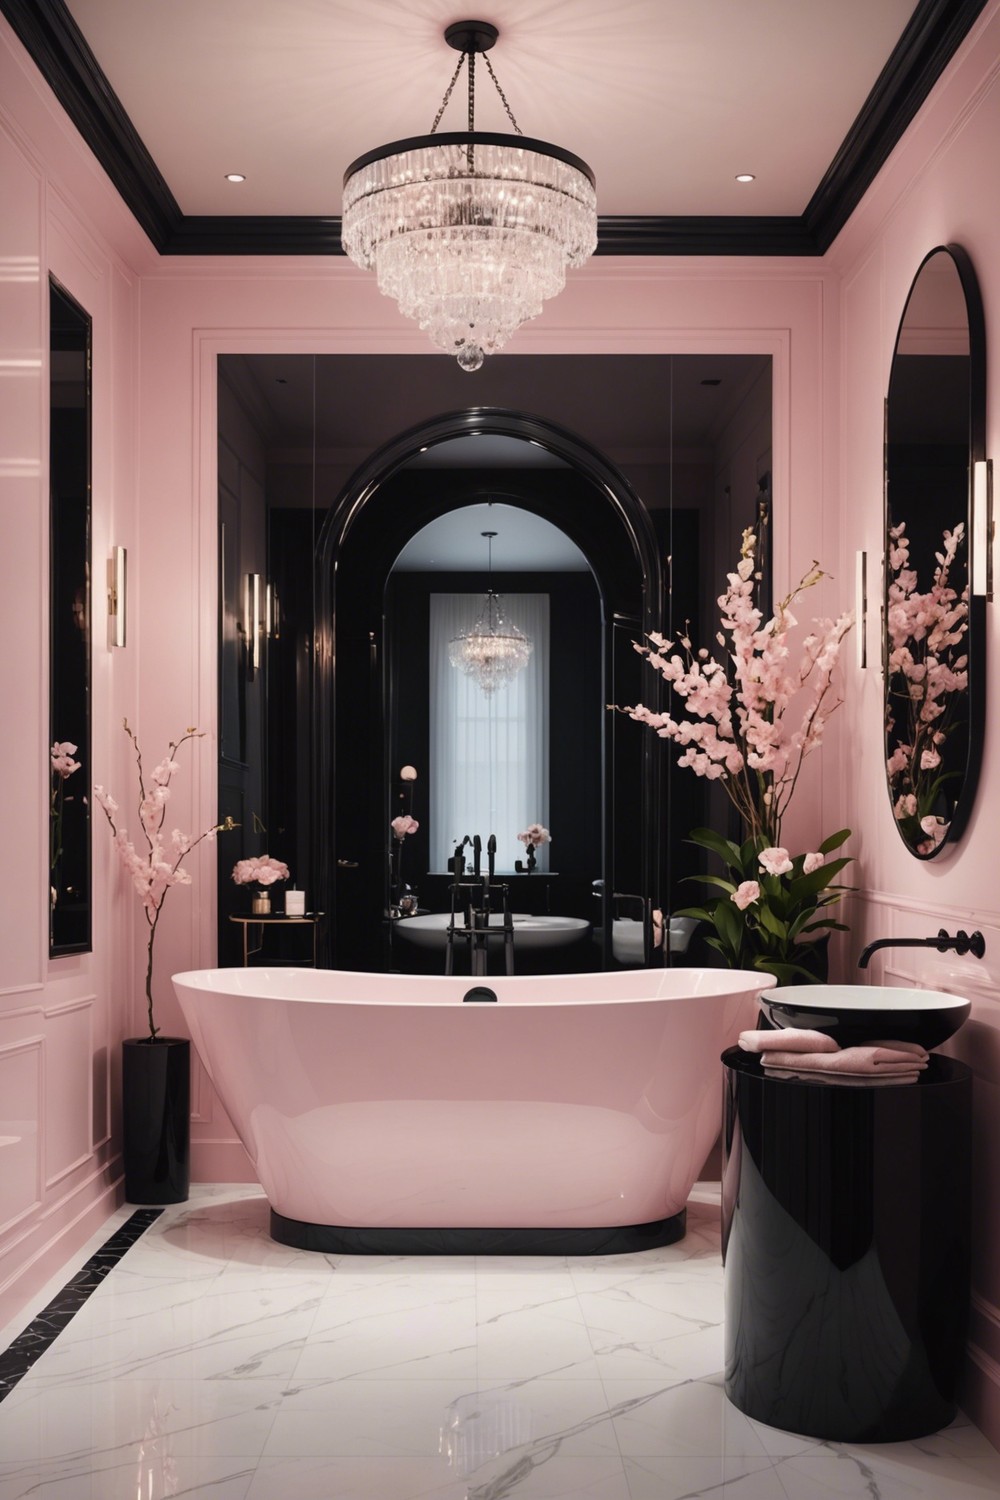 Soft Pink and Black Water-Inspired Bathroom